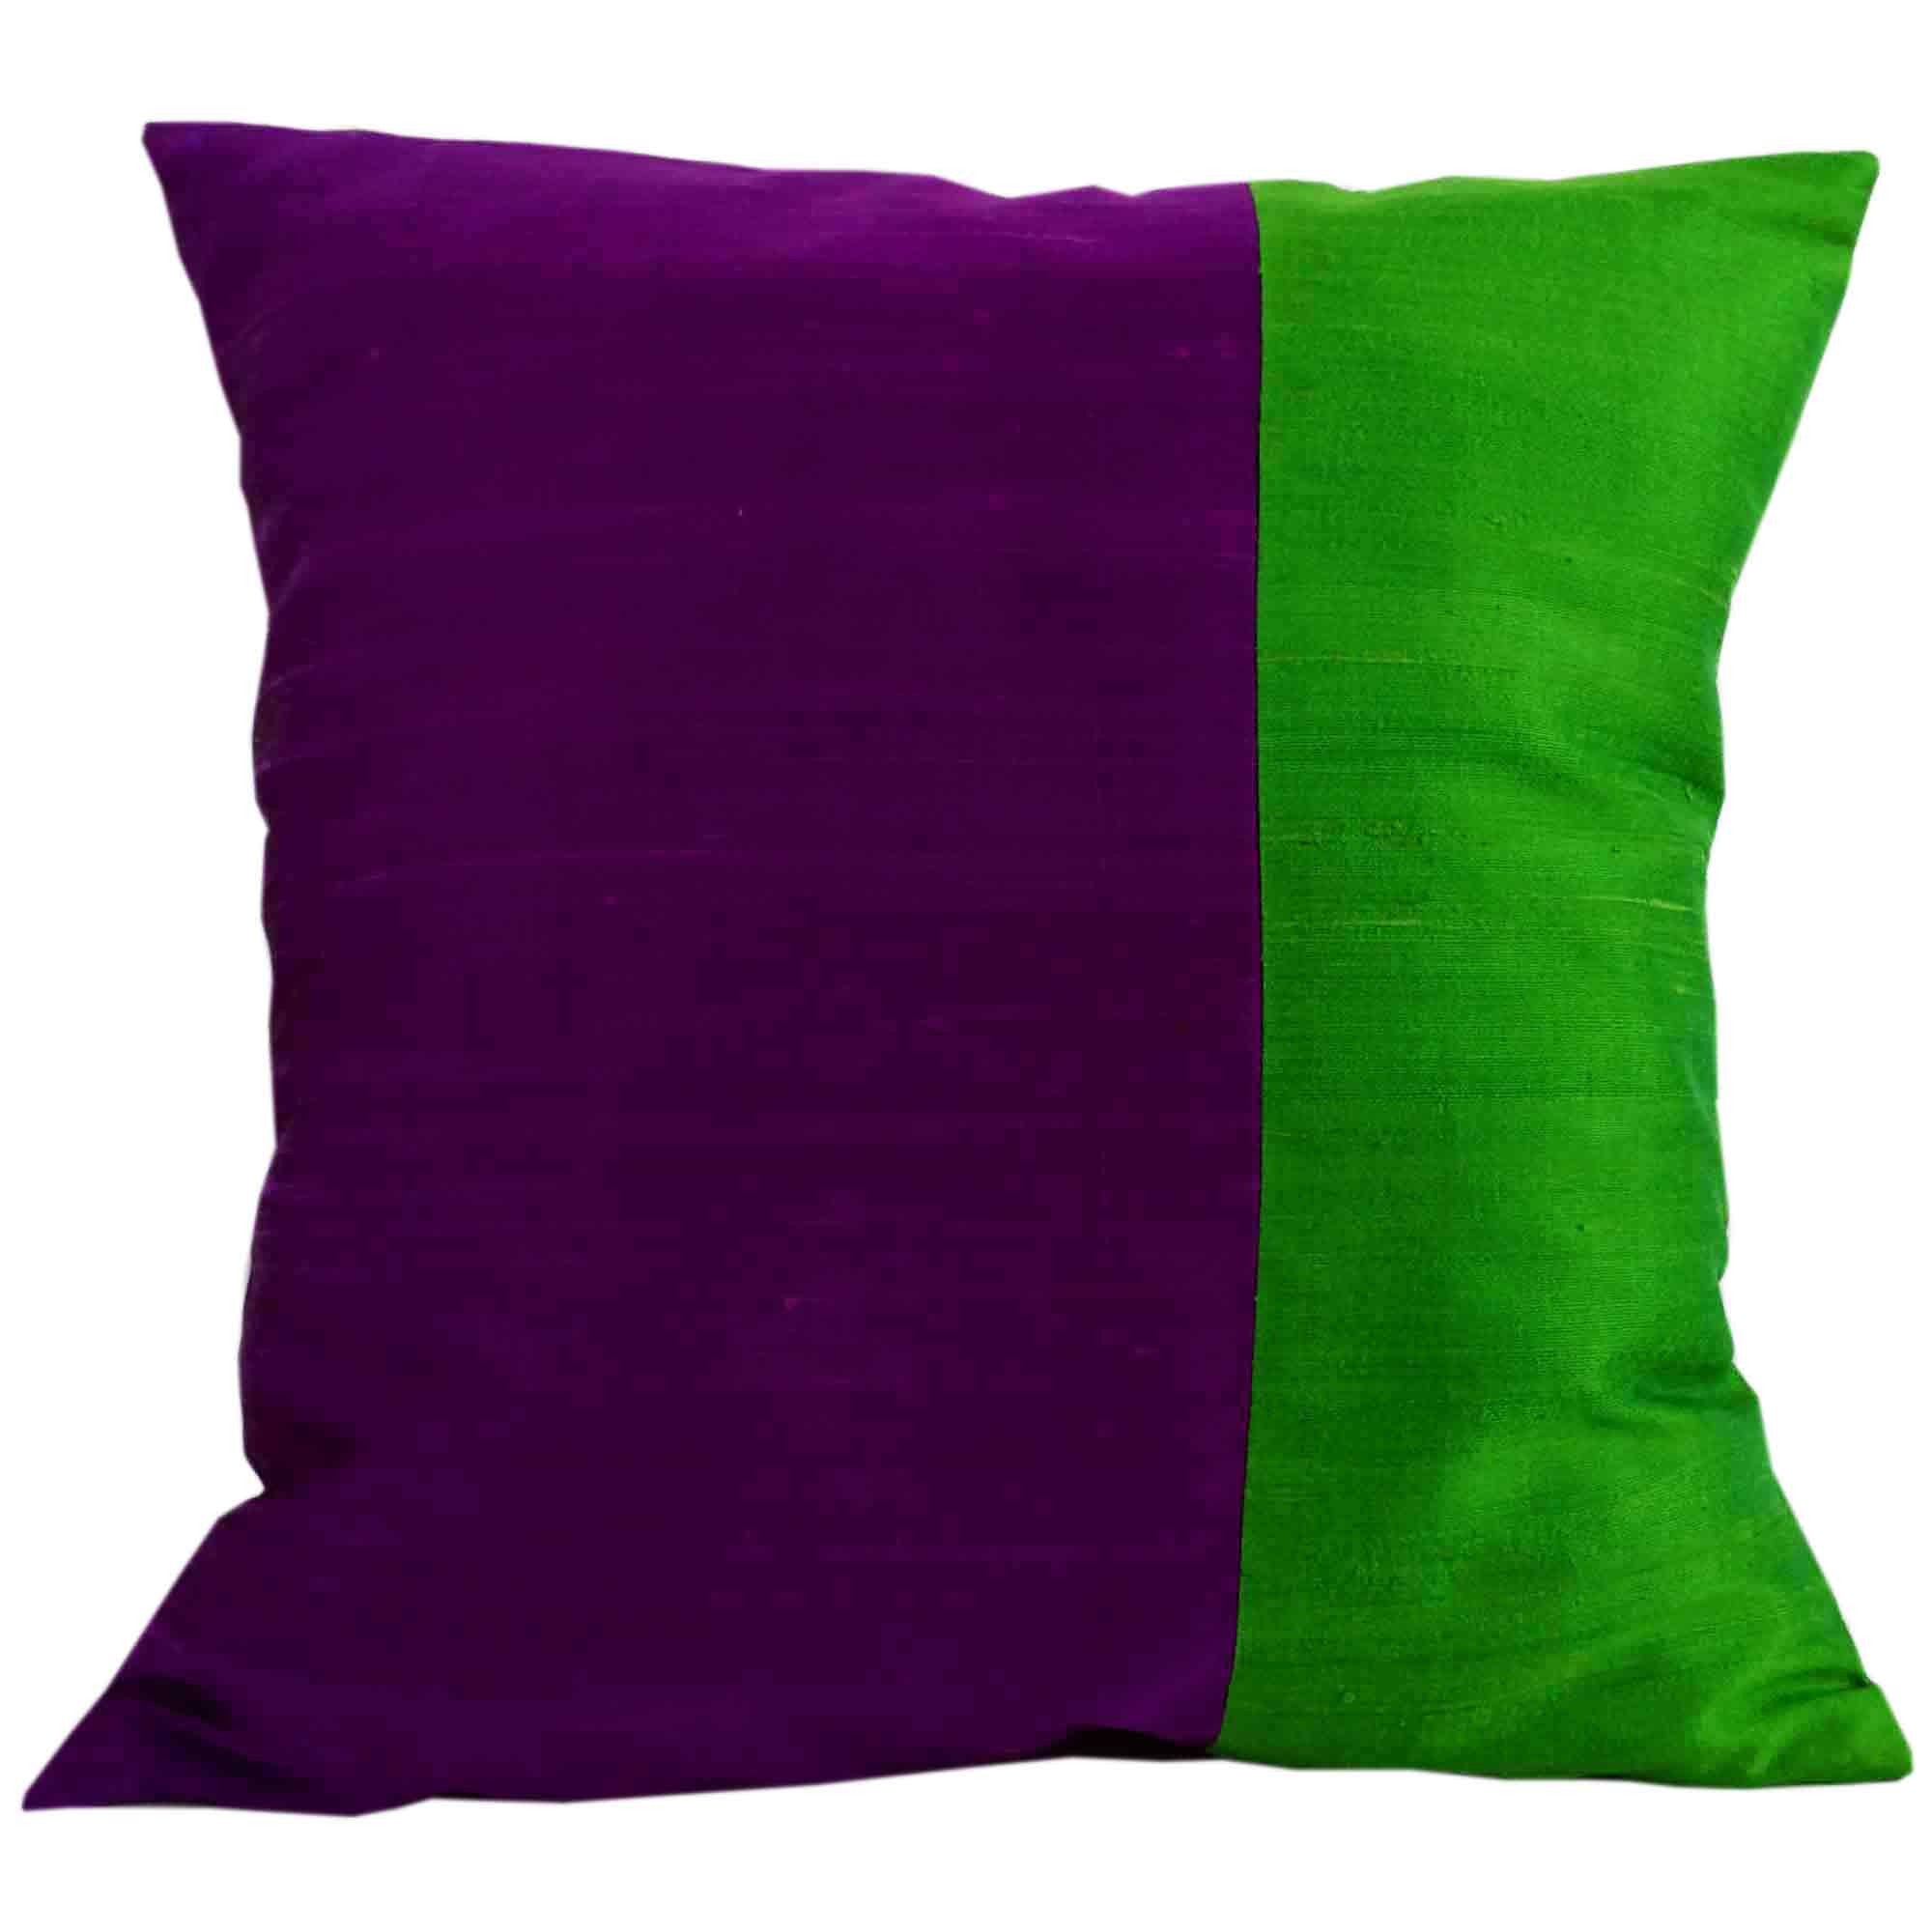 Color Block Cushion in Emerald Green and Morganite Pink Cashmere and Wool